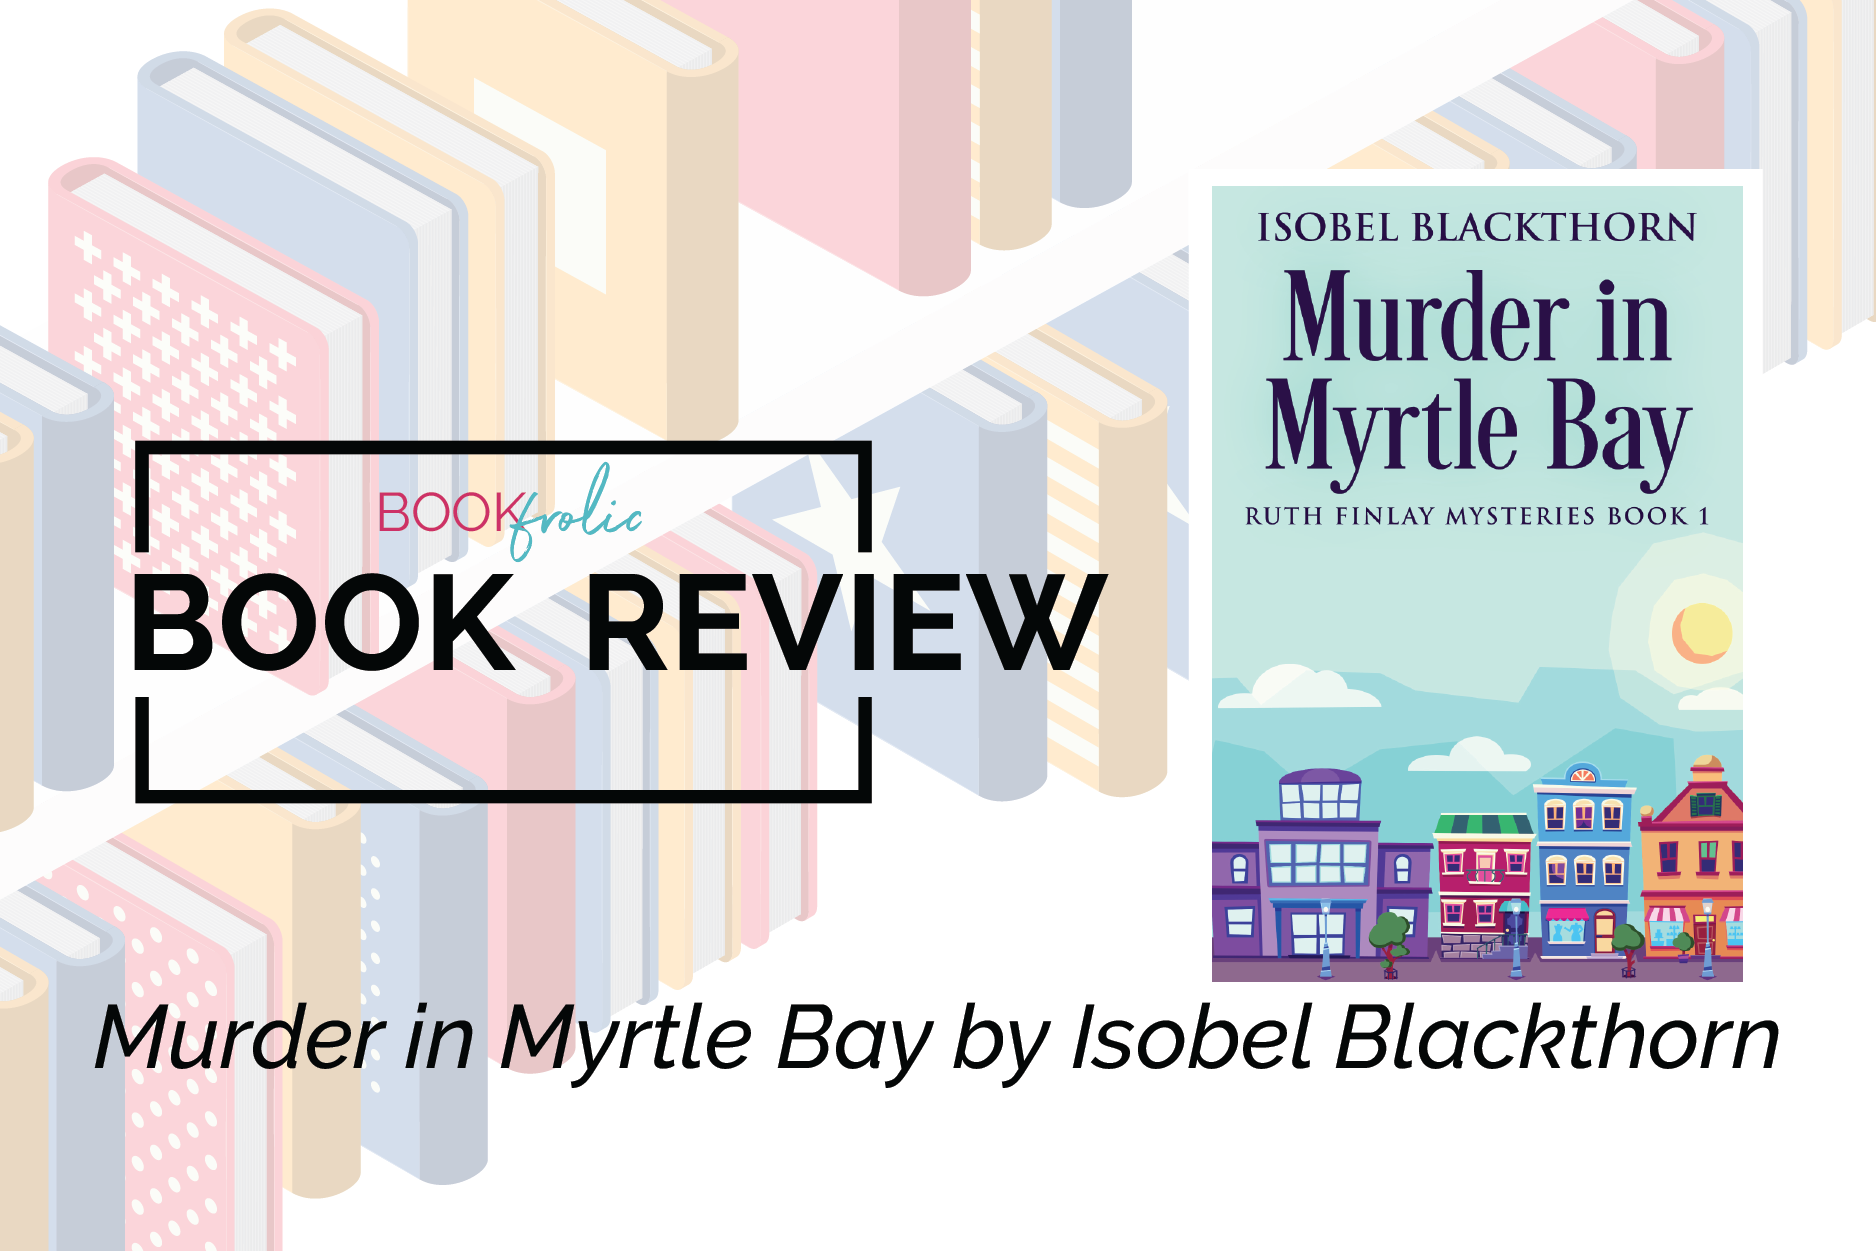 banner for book review of Murder in Myrtle Bay by Isobel Blackthorn